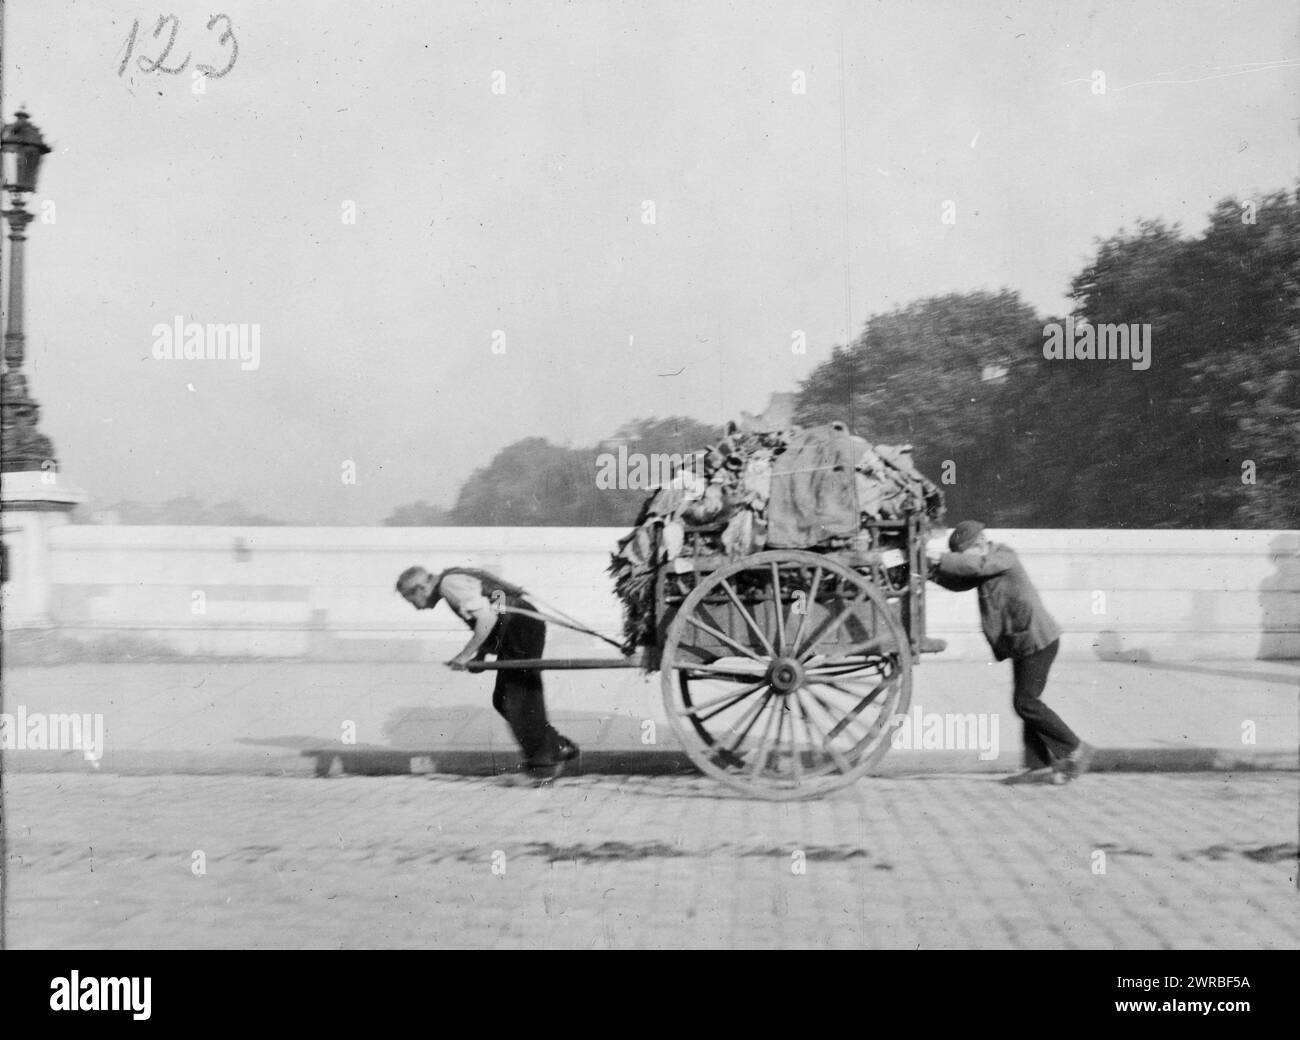 Paris, France, ca. 1920, Photo shows an elderly man pulling and a young man pushing a large two-wheel cart loaded with rags on a cobblestone street in Paris, France., Carpenter, Frank G. (Frank George), 1855-1924, collector, ca. 1920, Ragpicking, France, Paris, 1920, Photographic prints, 1920., Photographic prints, 1920, 1 photographic print Stock Photo